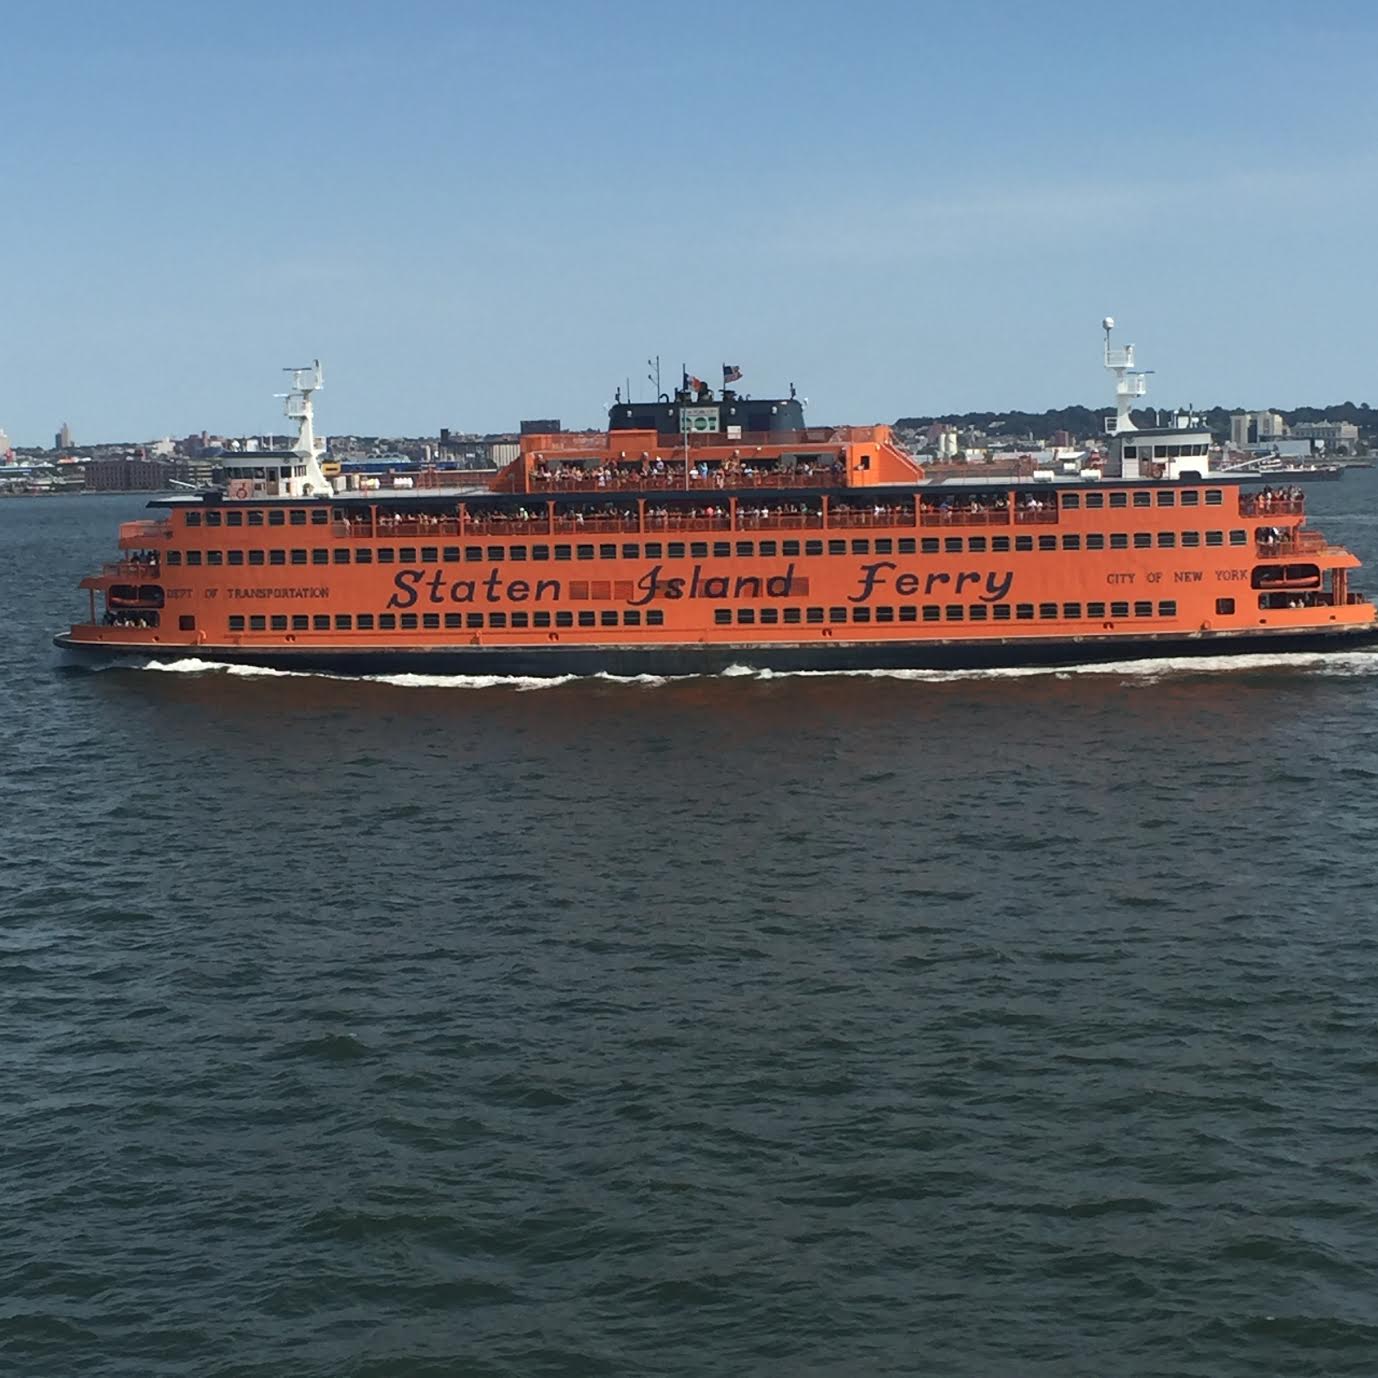 Things to see in New York City - Staten Island Ferry